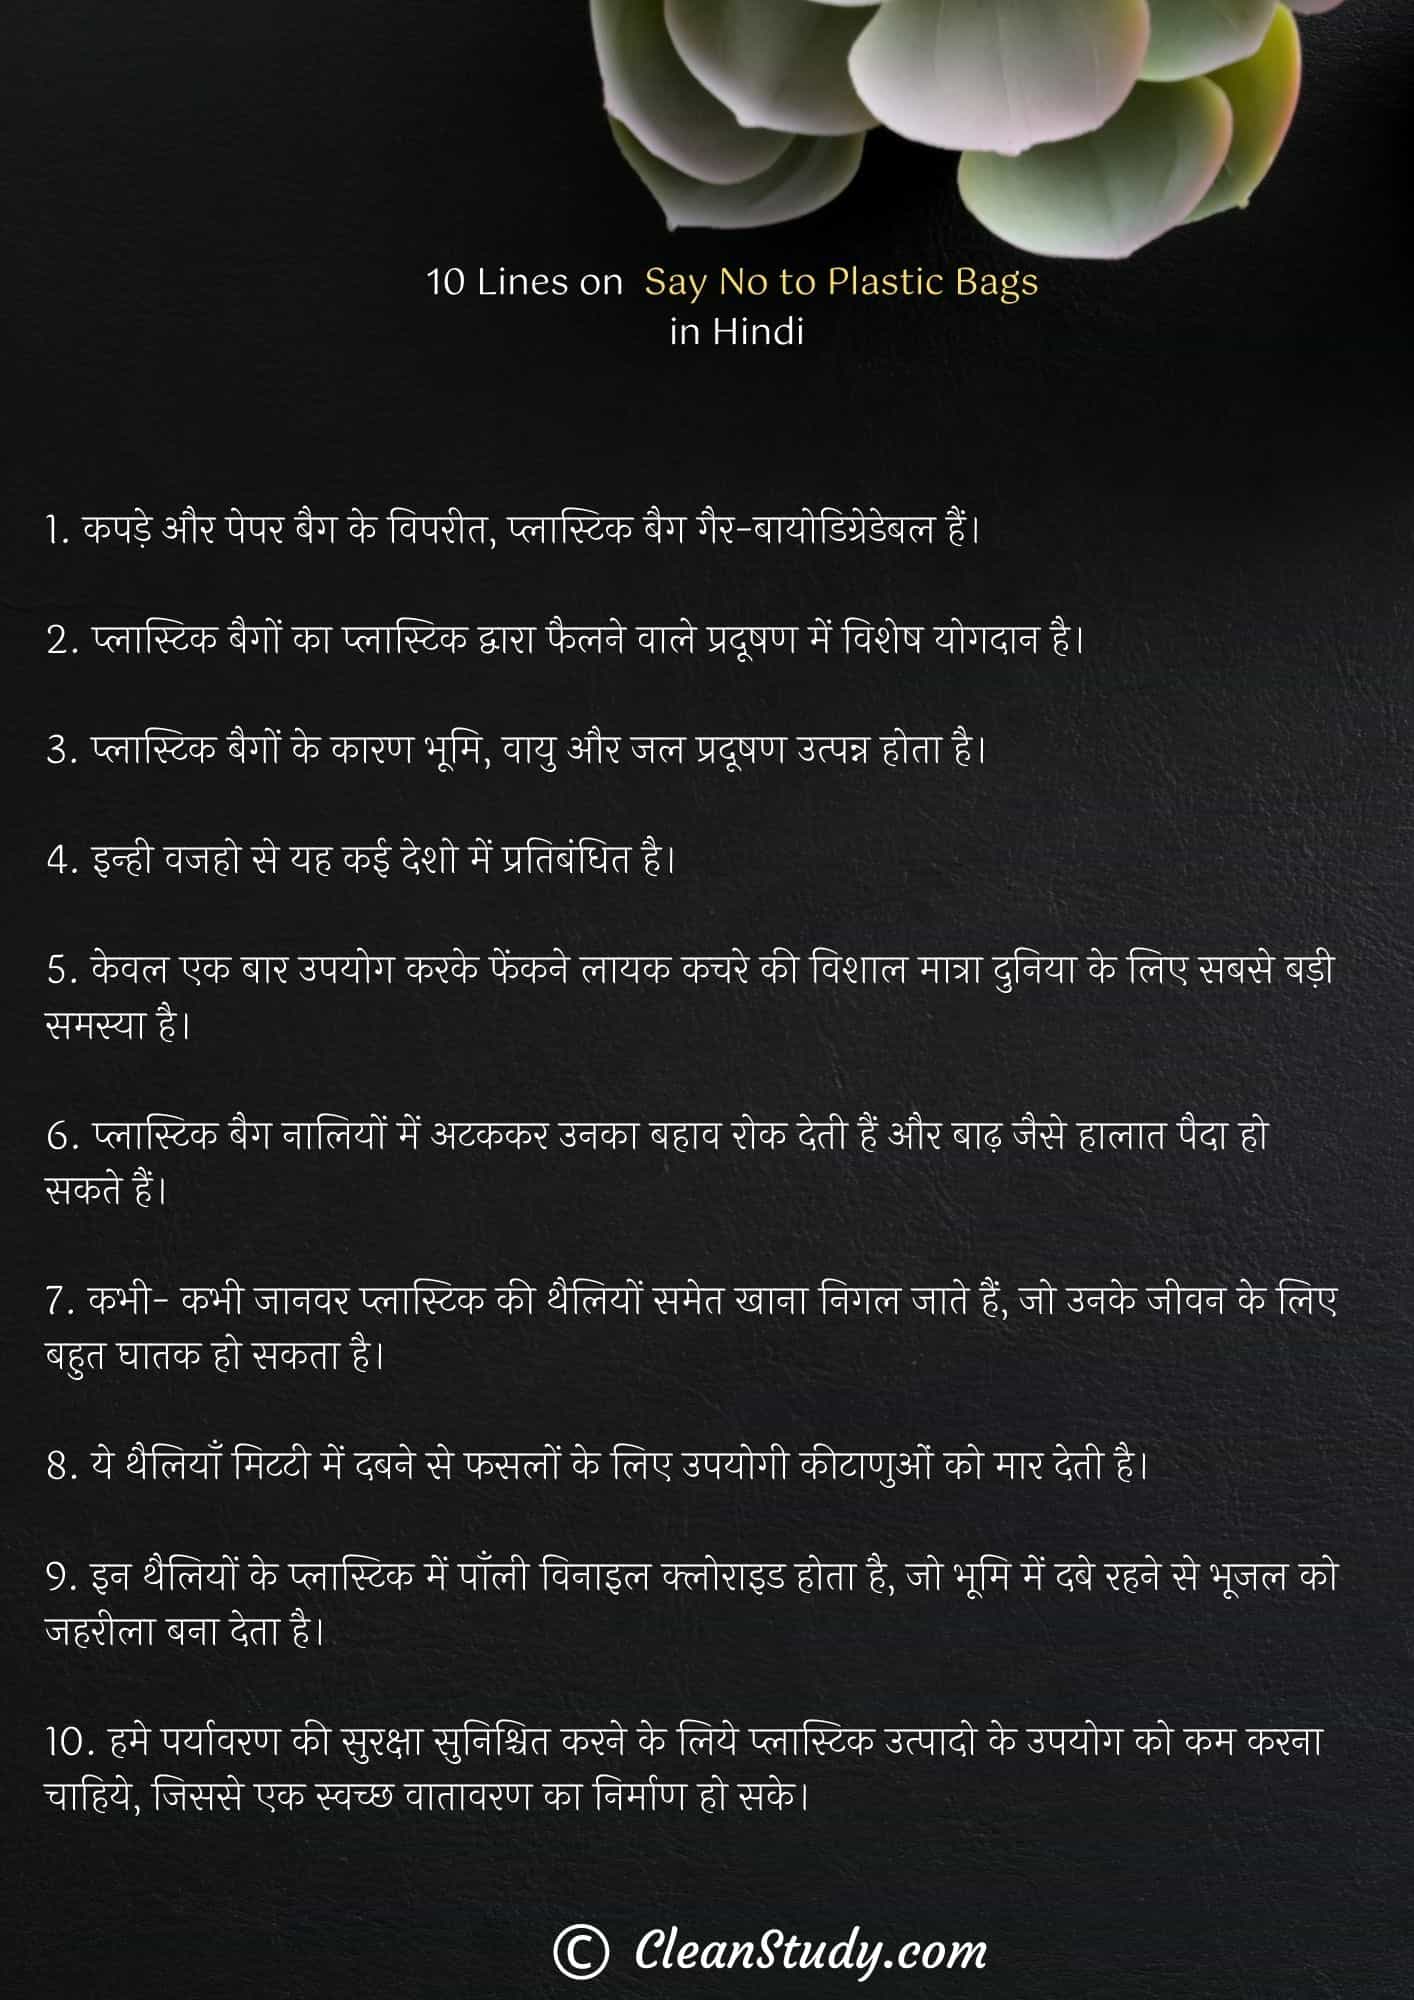 10 Lines on Say No to Plastic Bags in Hindi